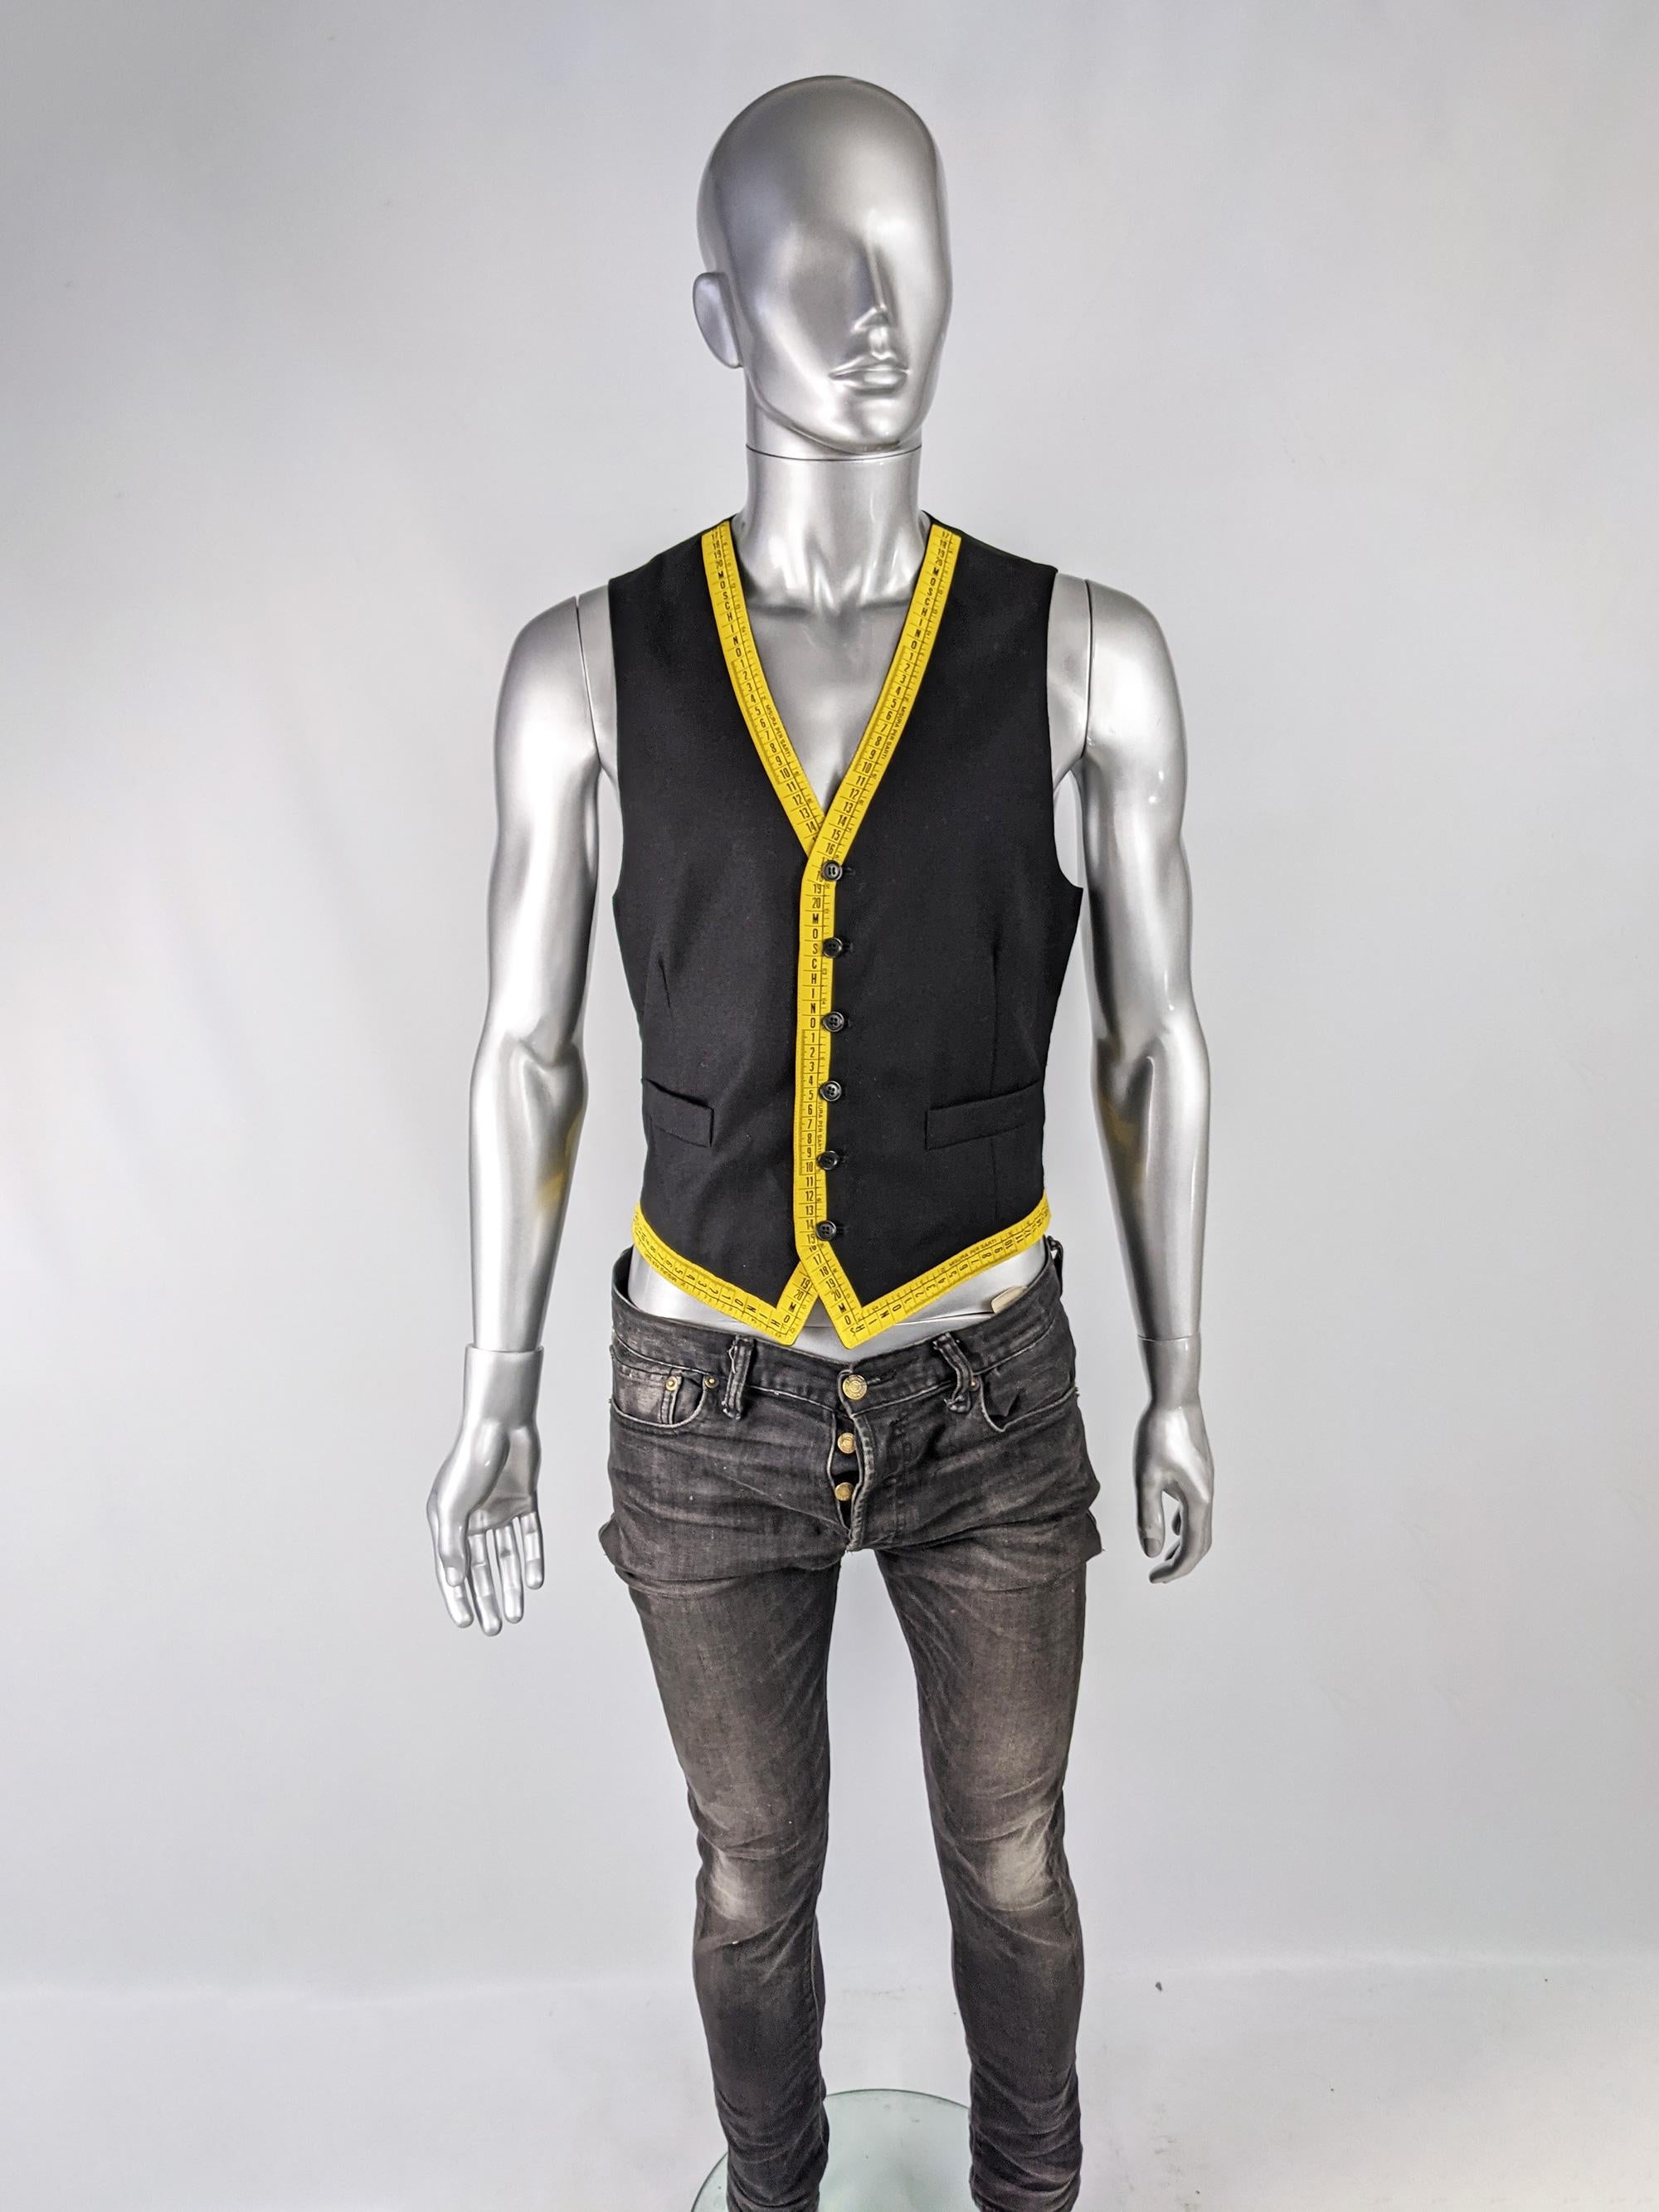 A rare and iconic vintage mens Moschino waistcoat from the late 80s / early 90s. Made in Italy, from a black wool with a cool tape measure design with Moschino spellouts in places.  

Size: Marked IT 48 / GB 38 / US 38 which roughly translates as a